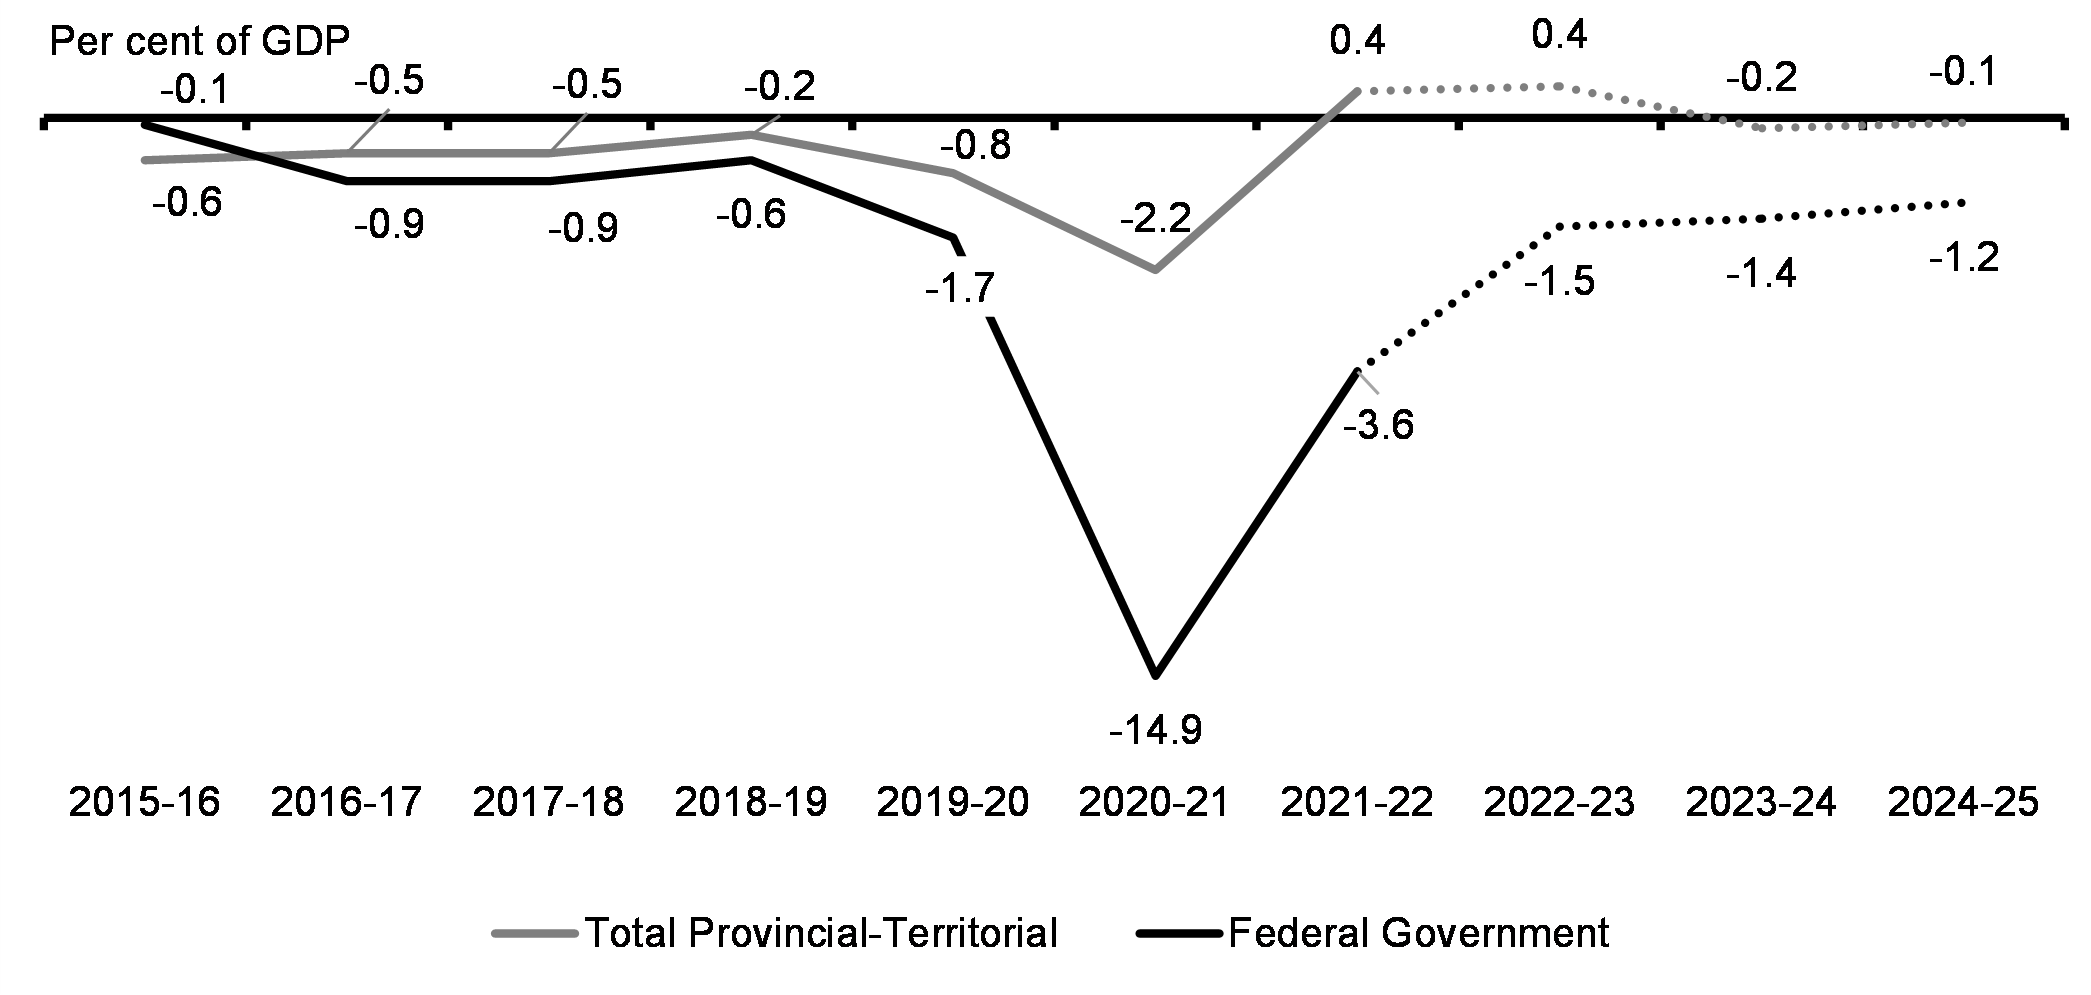 Chart 2.2: Federal and Provincial Budgetary Balances Following Emergency Federal Pandemic Spending